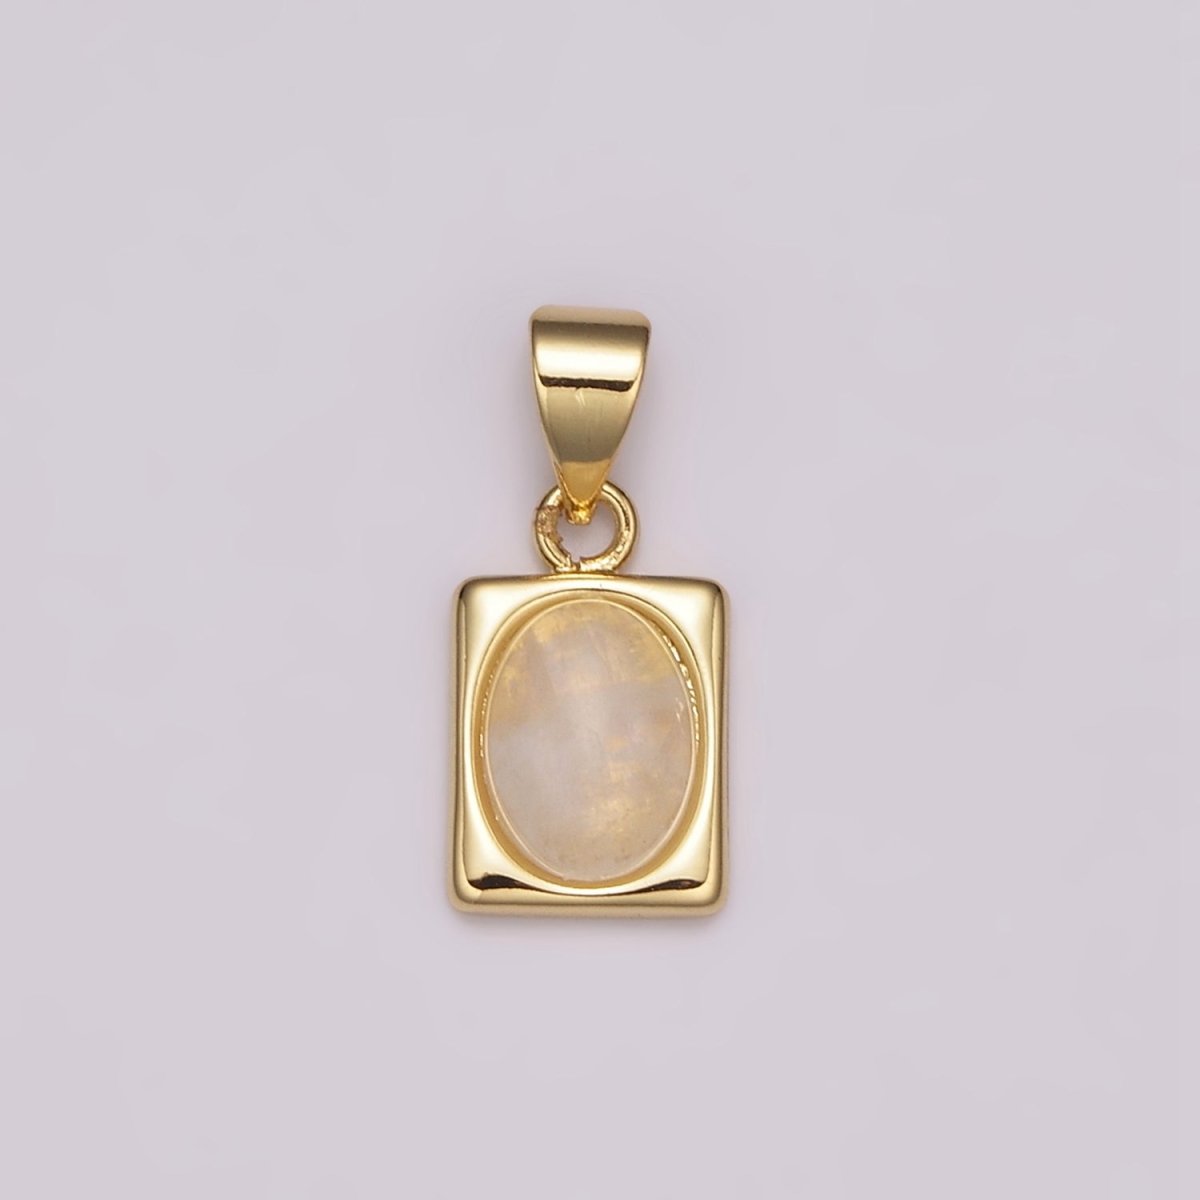 Dainty Moonstone Pendant 24k Gold Filled Square Charm for Minimalist Jewelry Making N-486 - DLUXCA